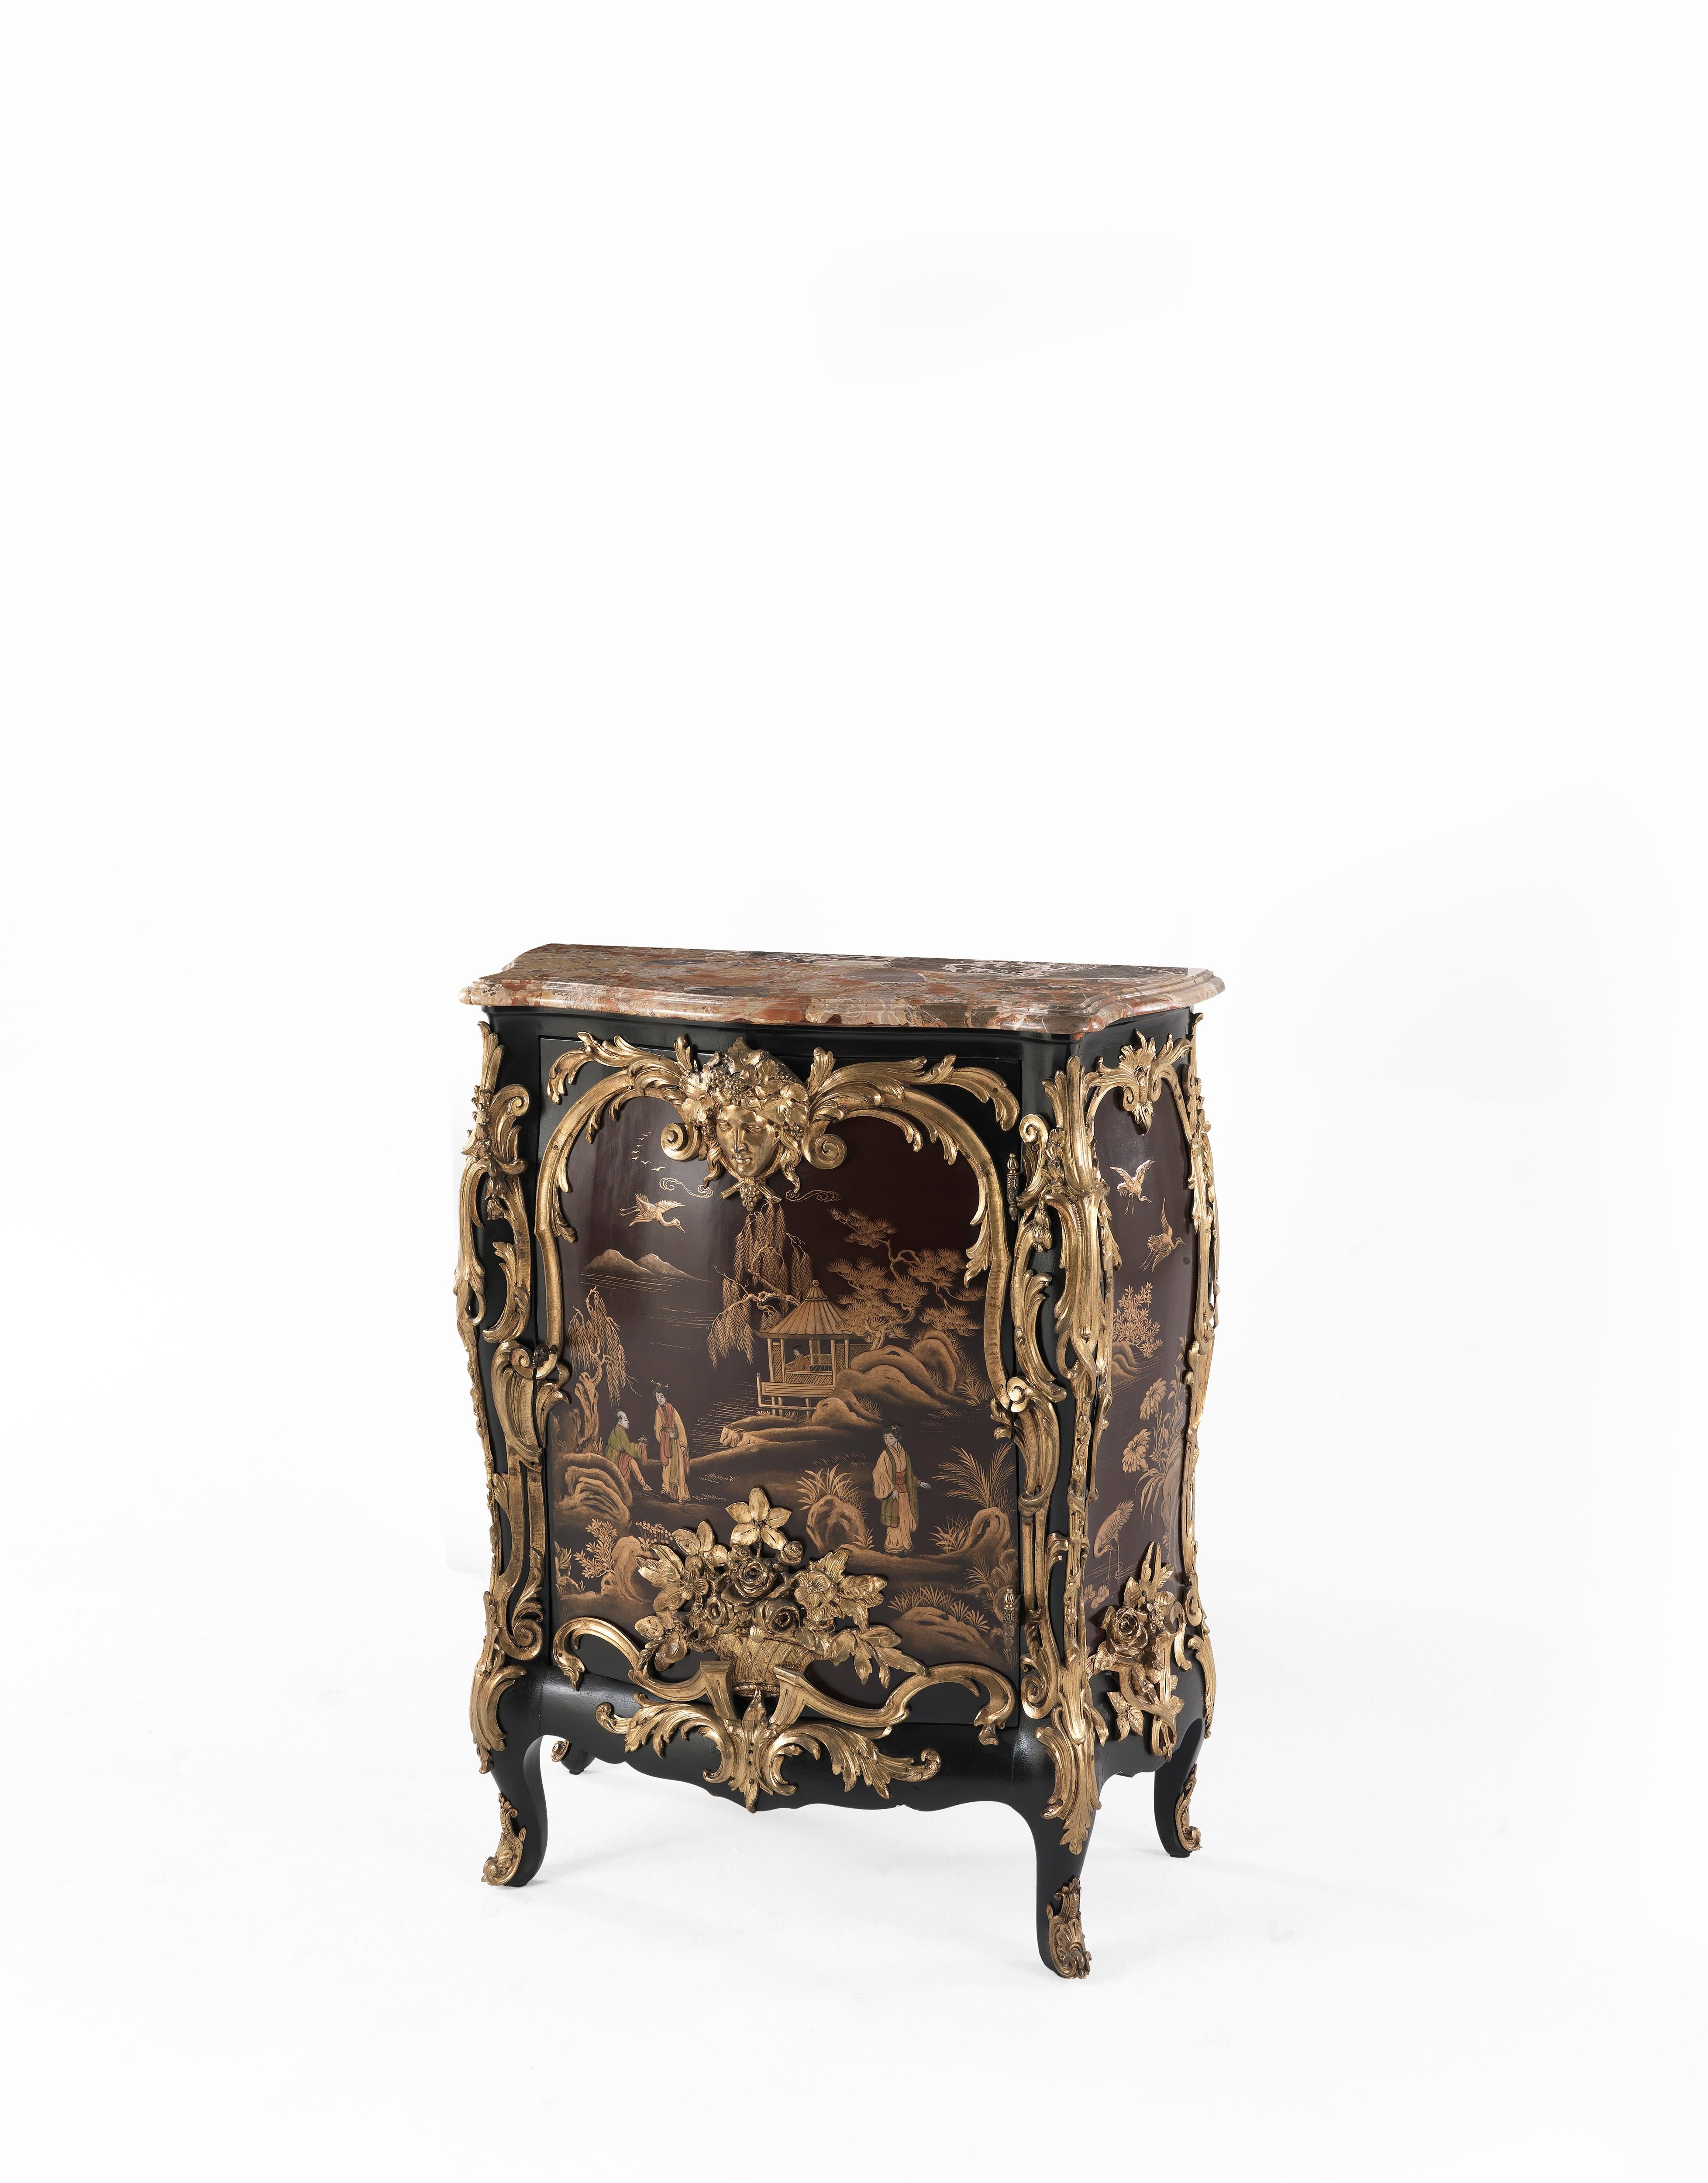 An important and richly decorated Italian ormolu-mounted and lacquered cabinet, ca. 1930.
The cabinet structural frame is in hardwood, darkened by painting. The bombé case has its surface lacquered, taking inspiration from Japanese subjects, with